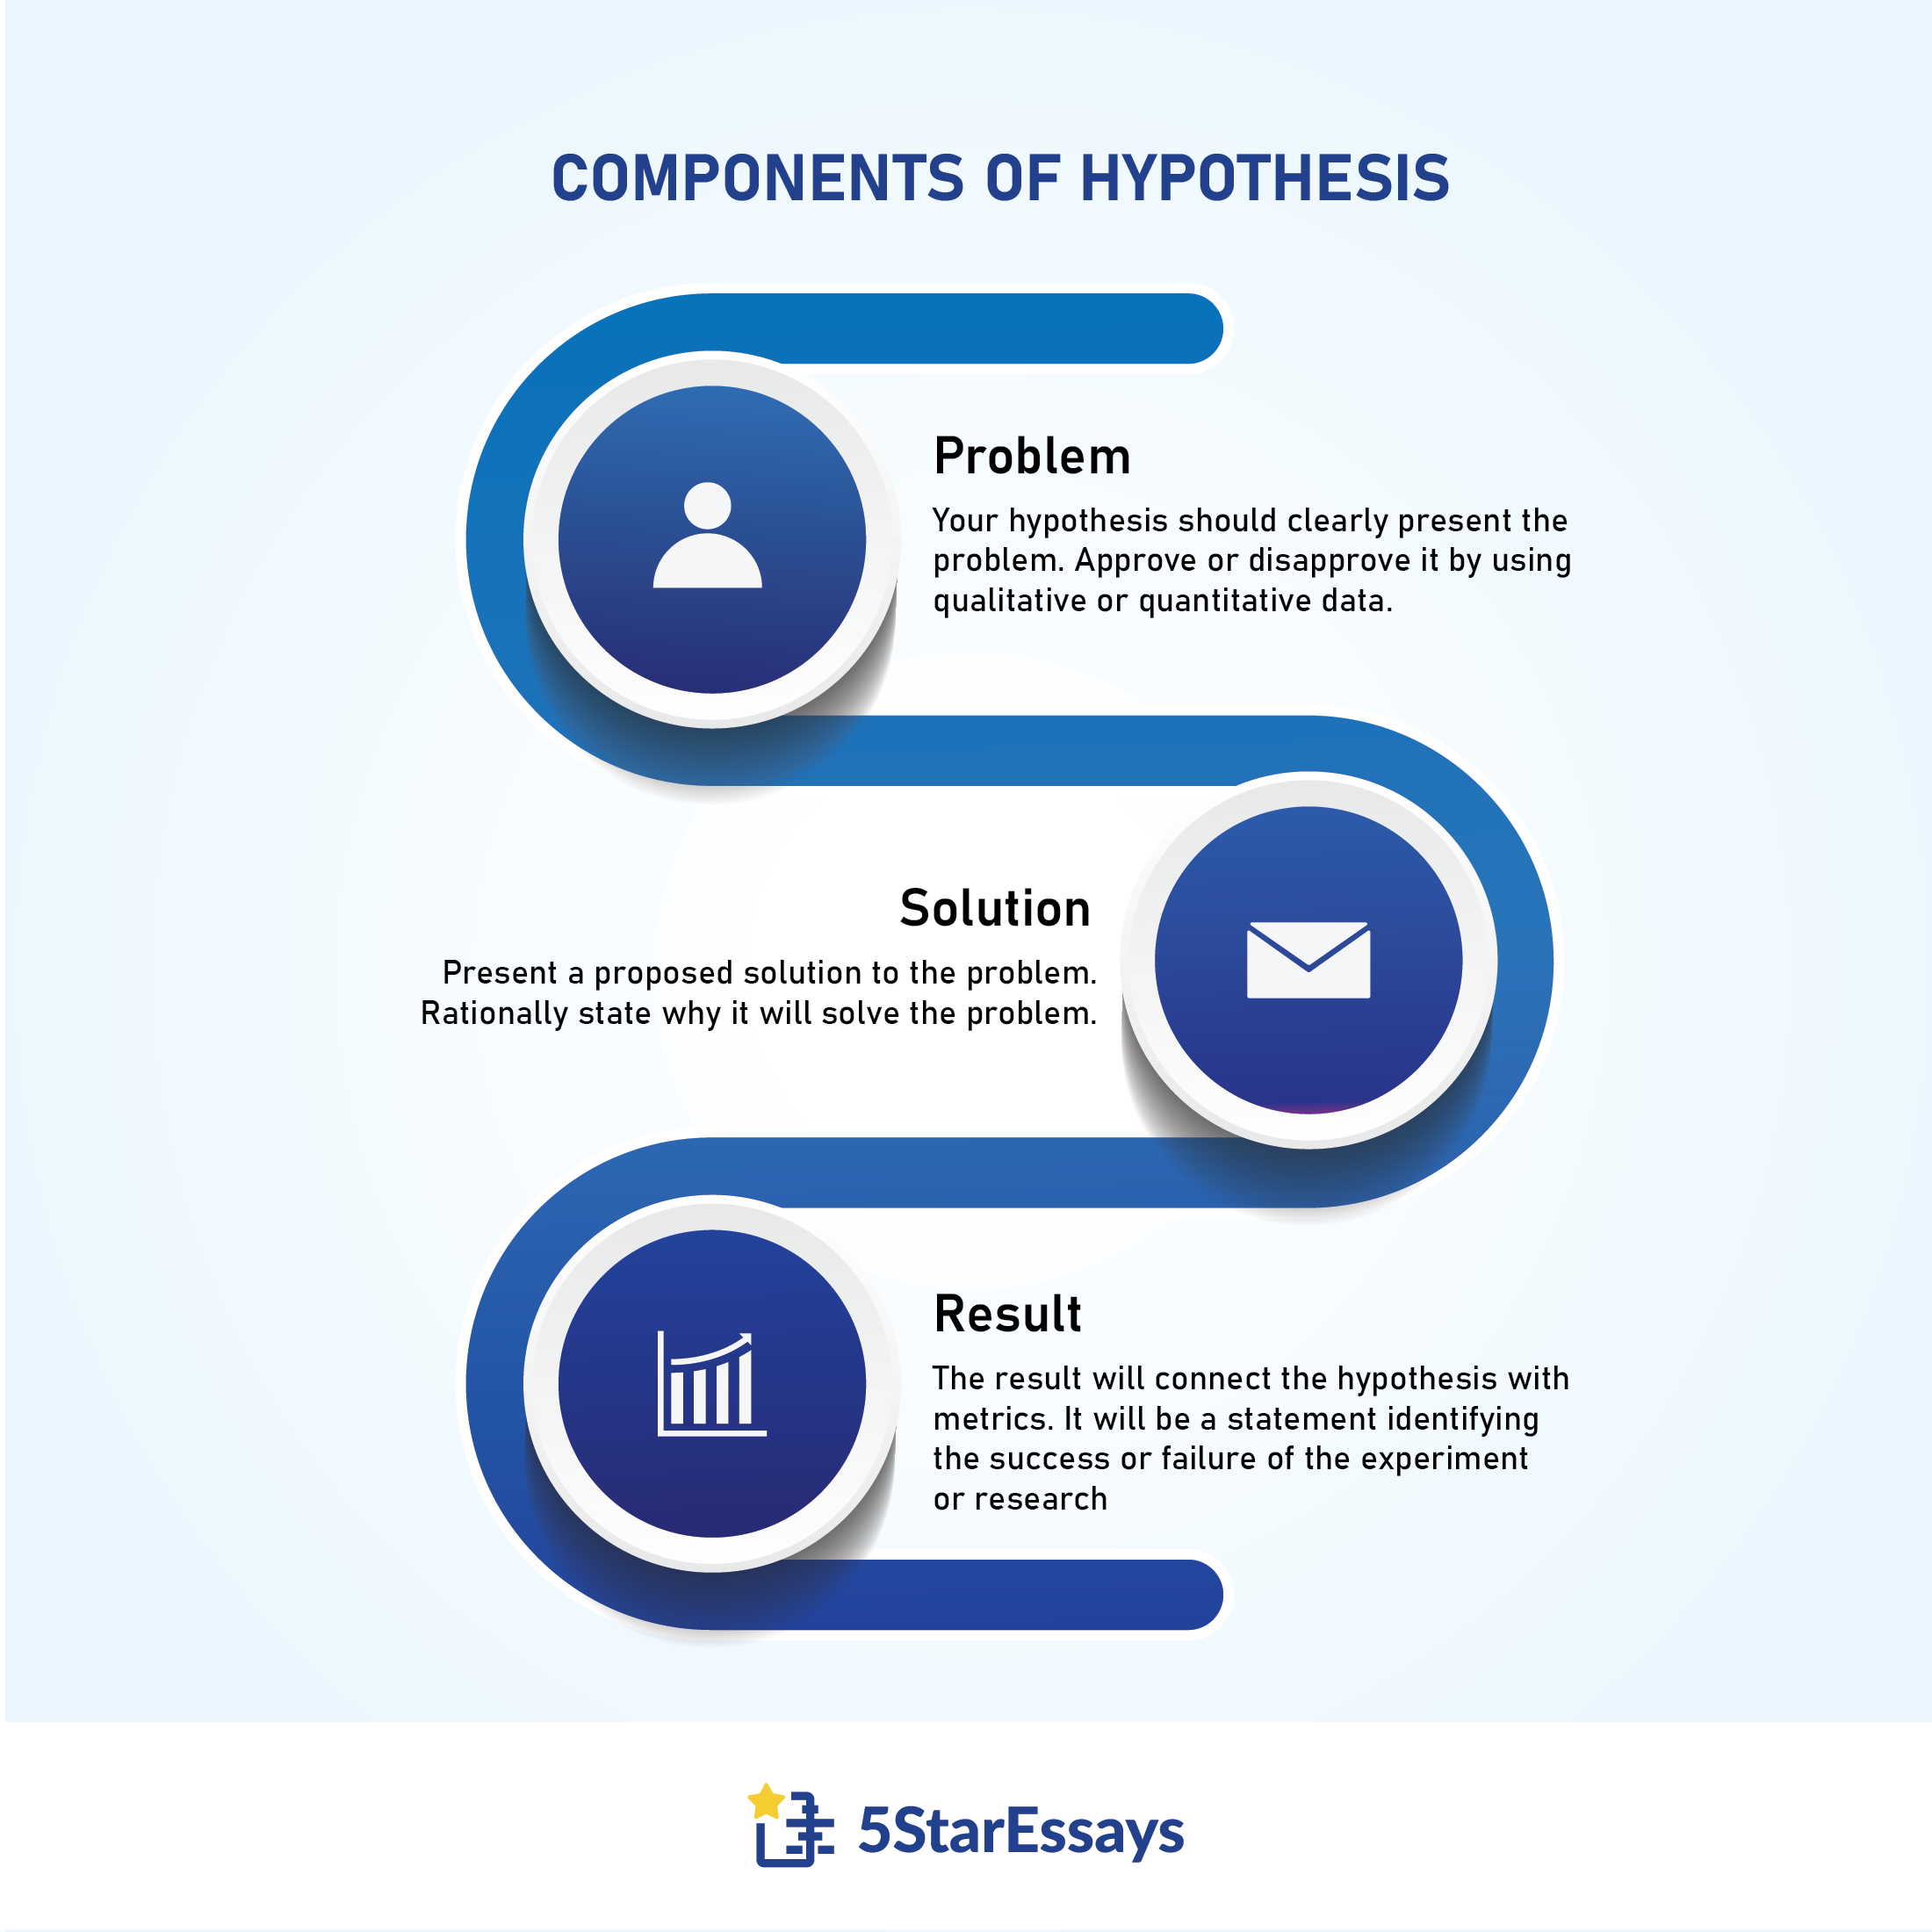 types of hypothesis